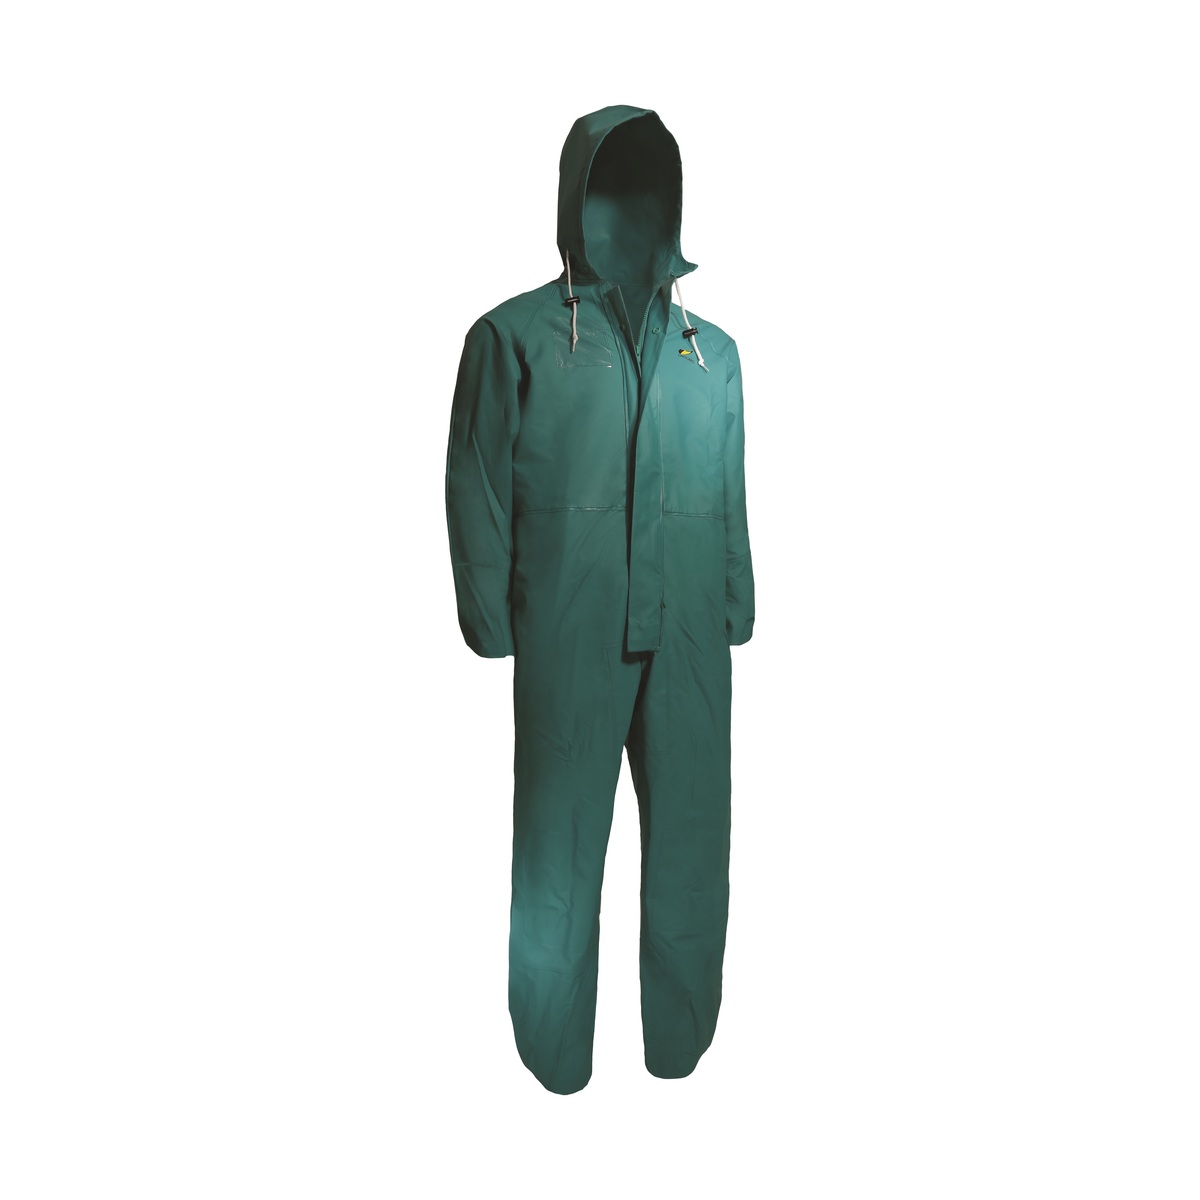 Dunlop® Protective Footwear X-Large Green Chemtex .42 mm Nylon/Polyester/PVC Coveralls With Attached Hood